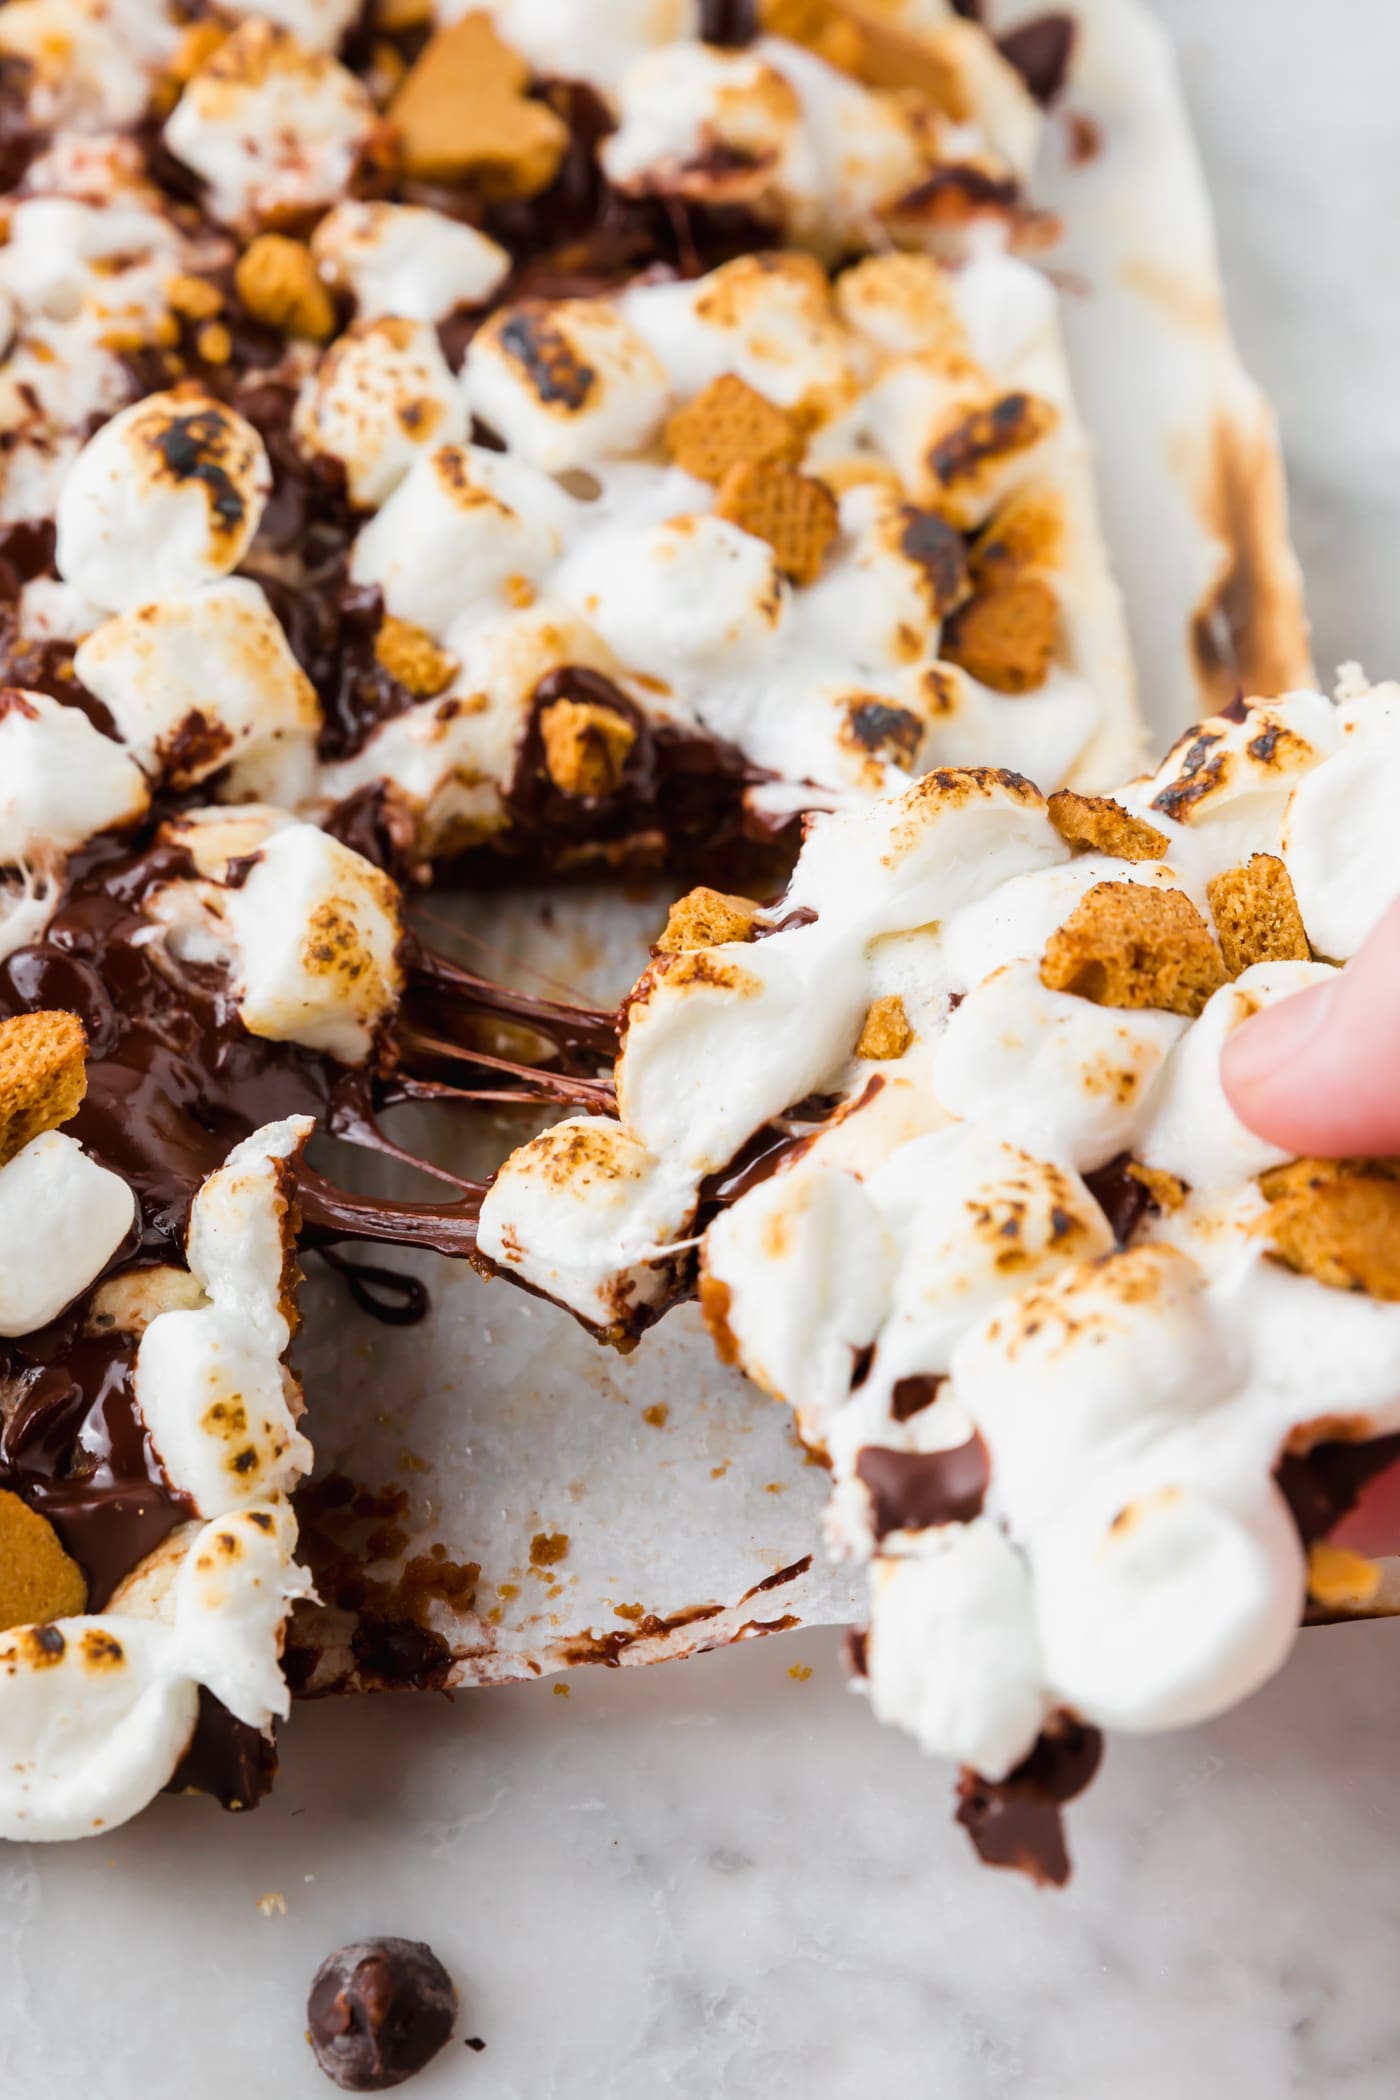 A slice of gluten-free s'mores bar being pulled out from the group.